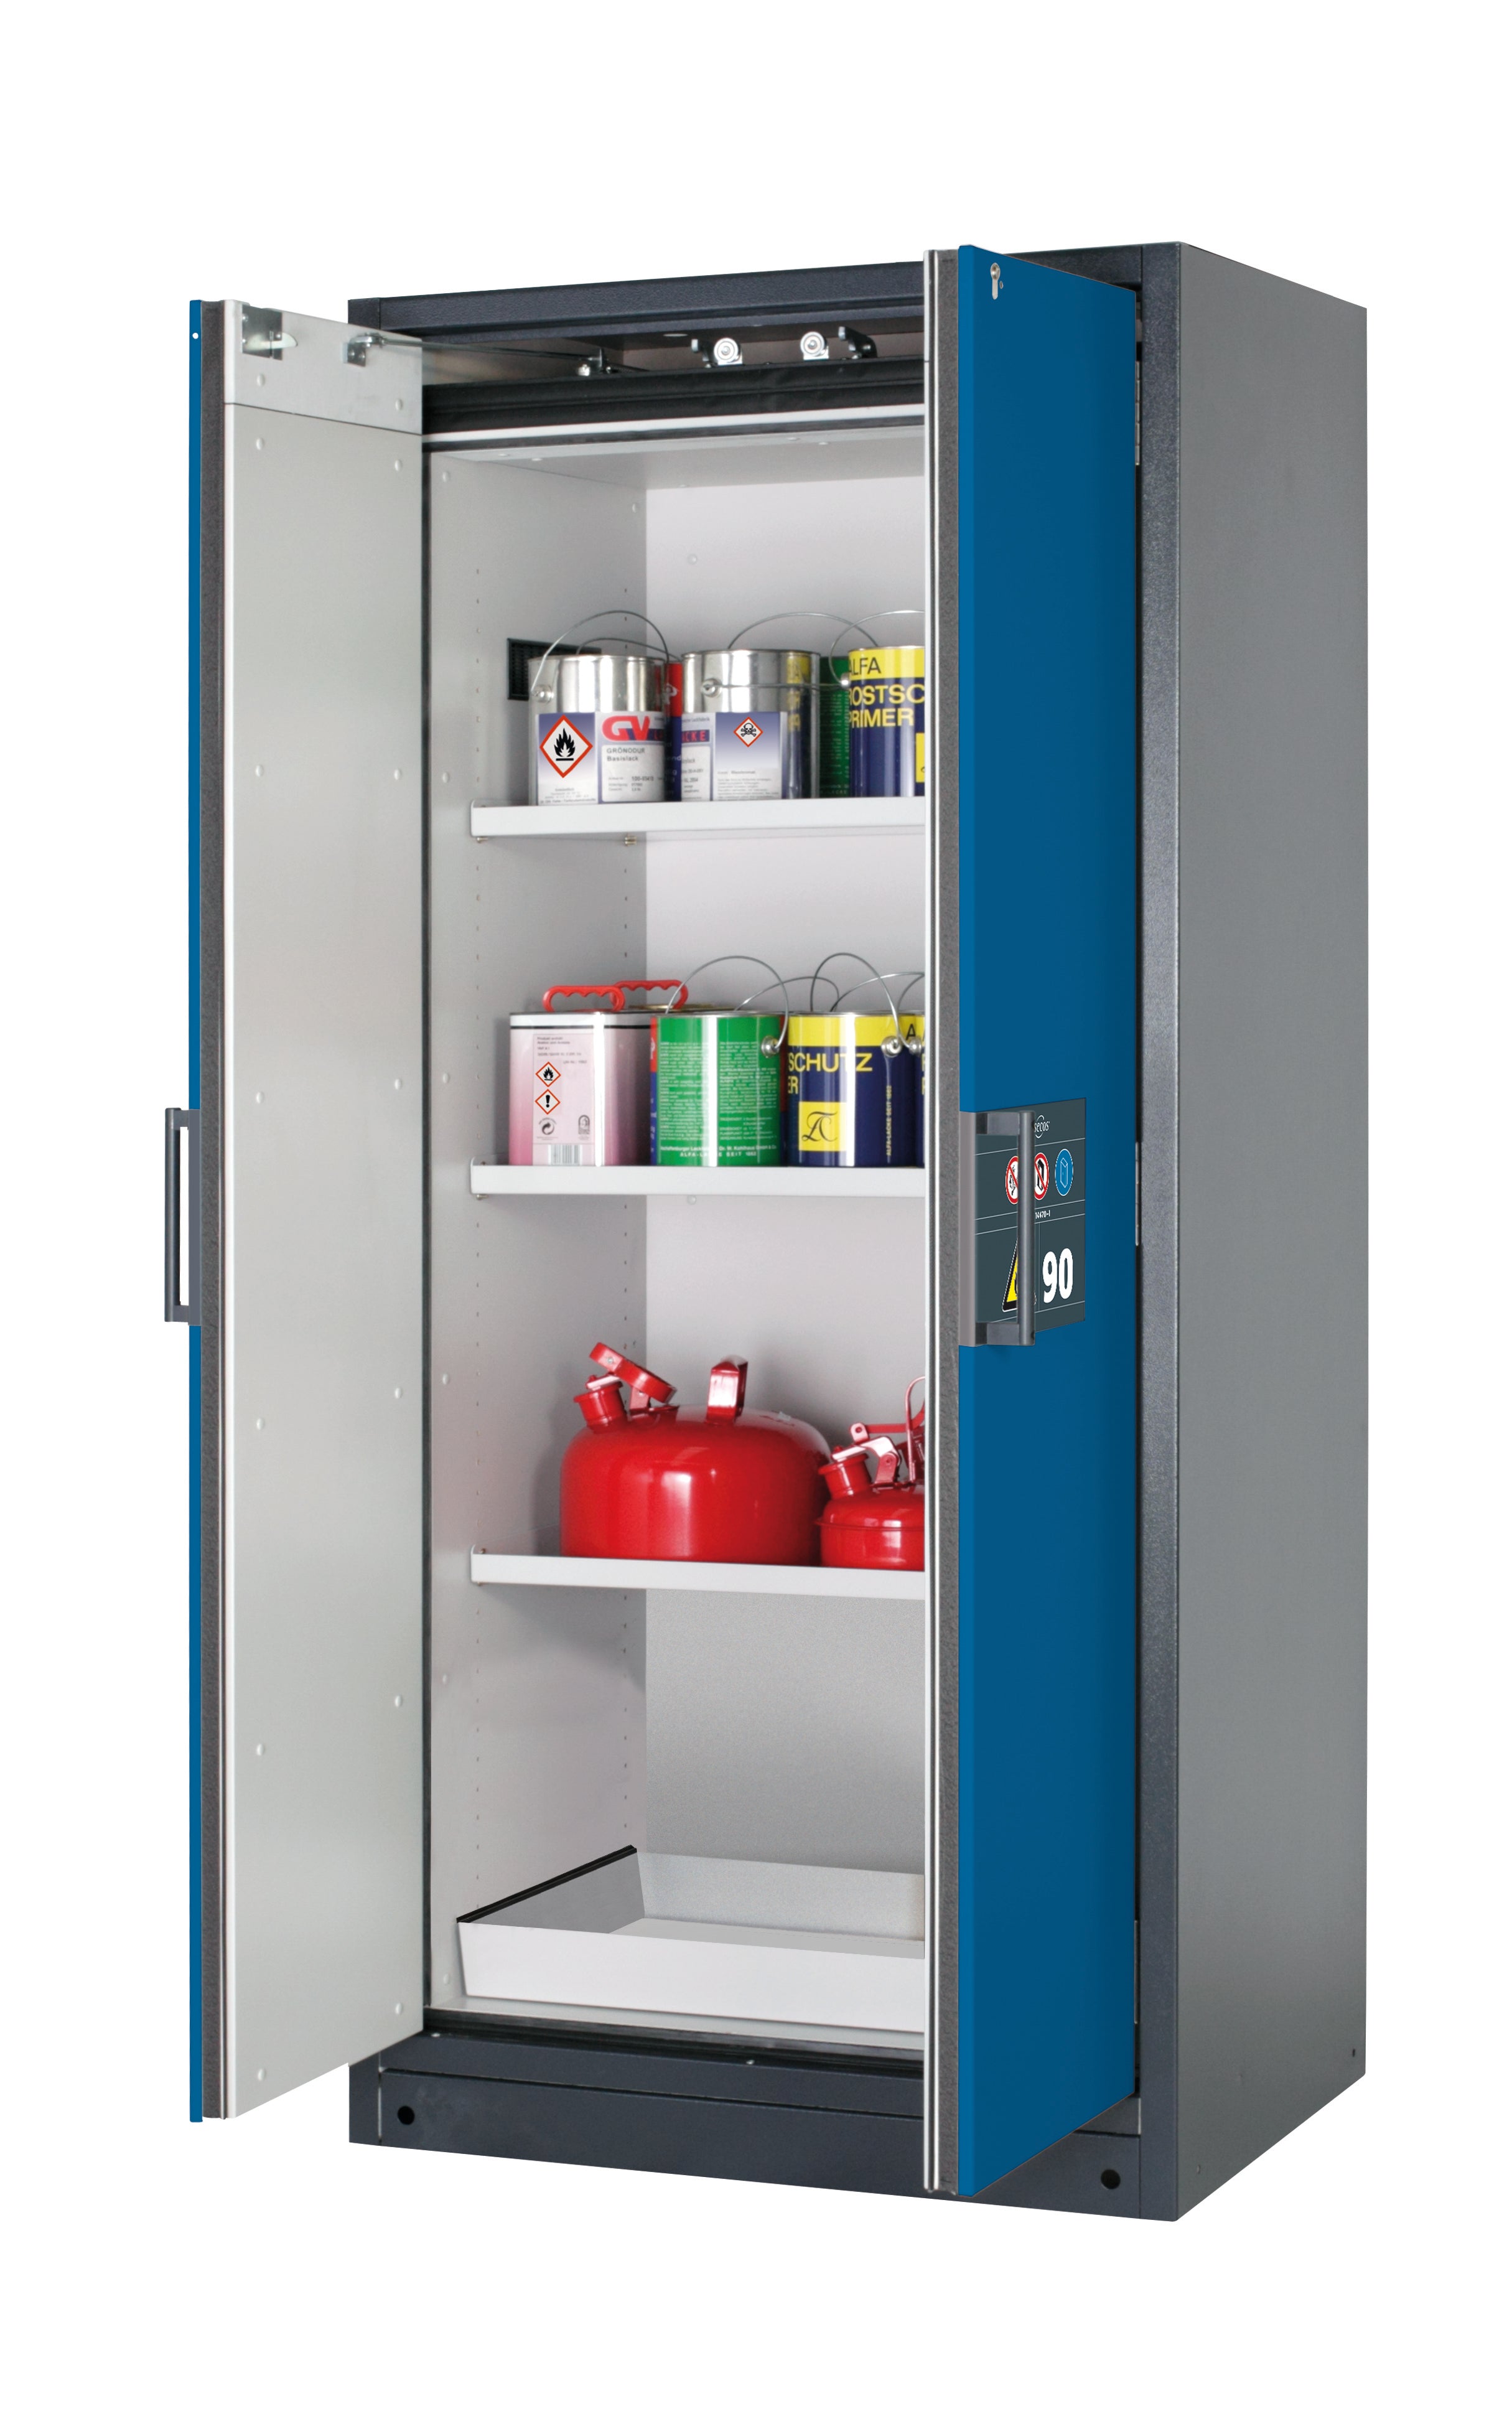 Type 90 safety storage cabinet Q-CLASSIC-90 model Q90.195.090 in gentian blue RAL 5010 with 3x shelf standard (sheet steel),